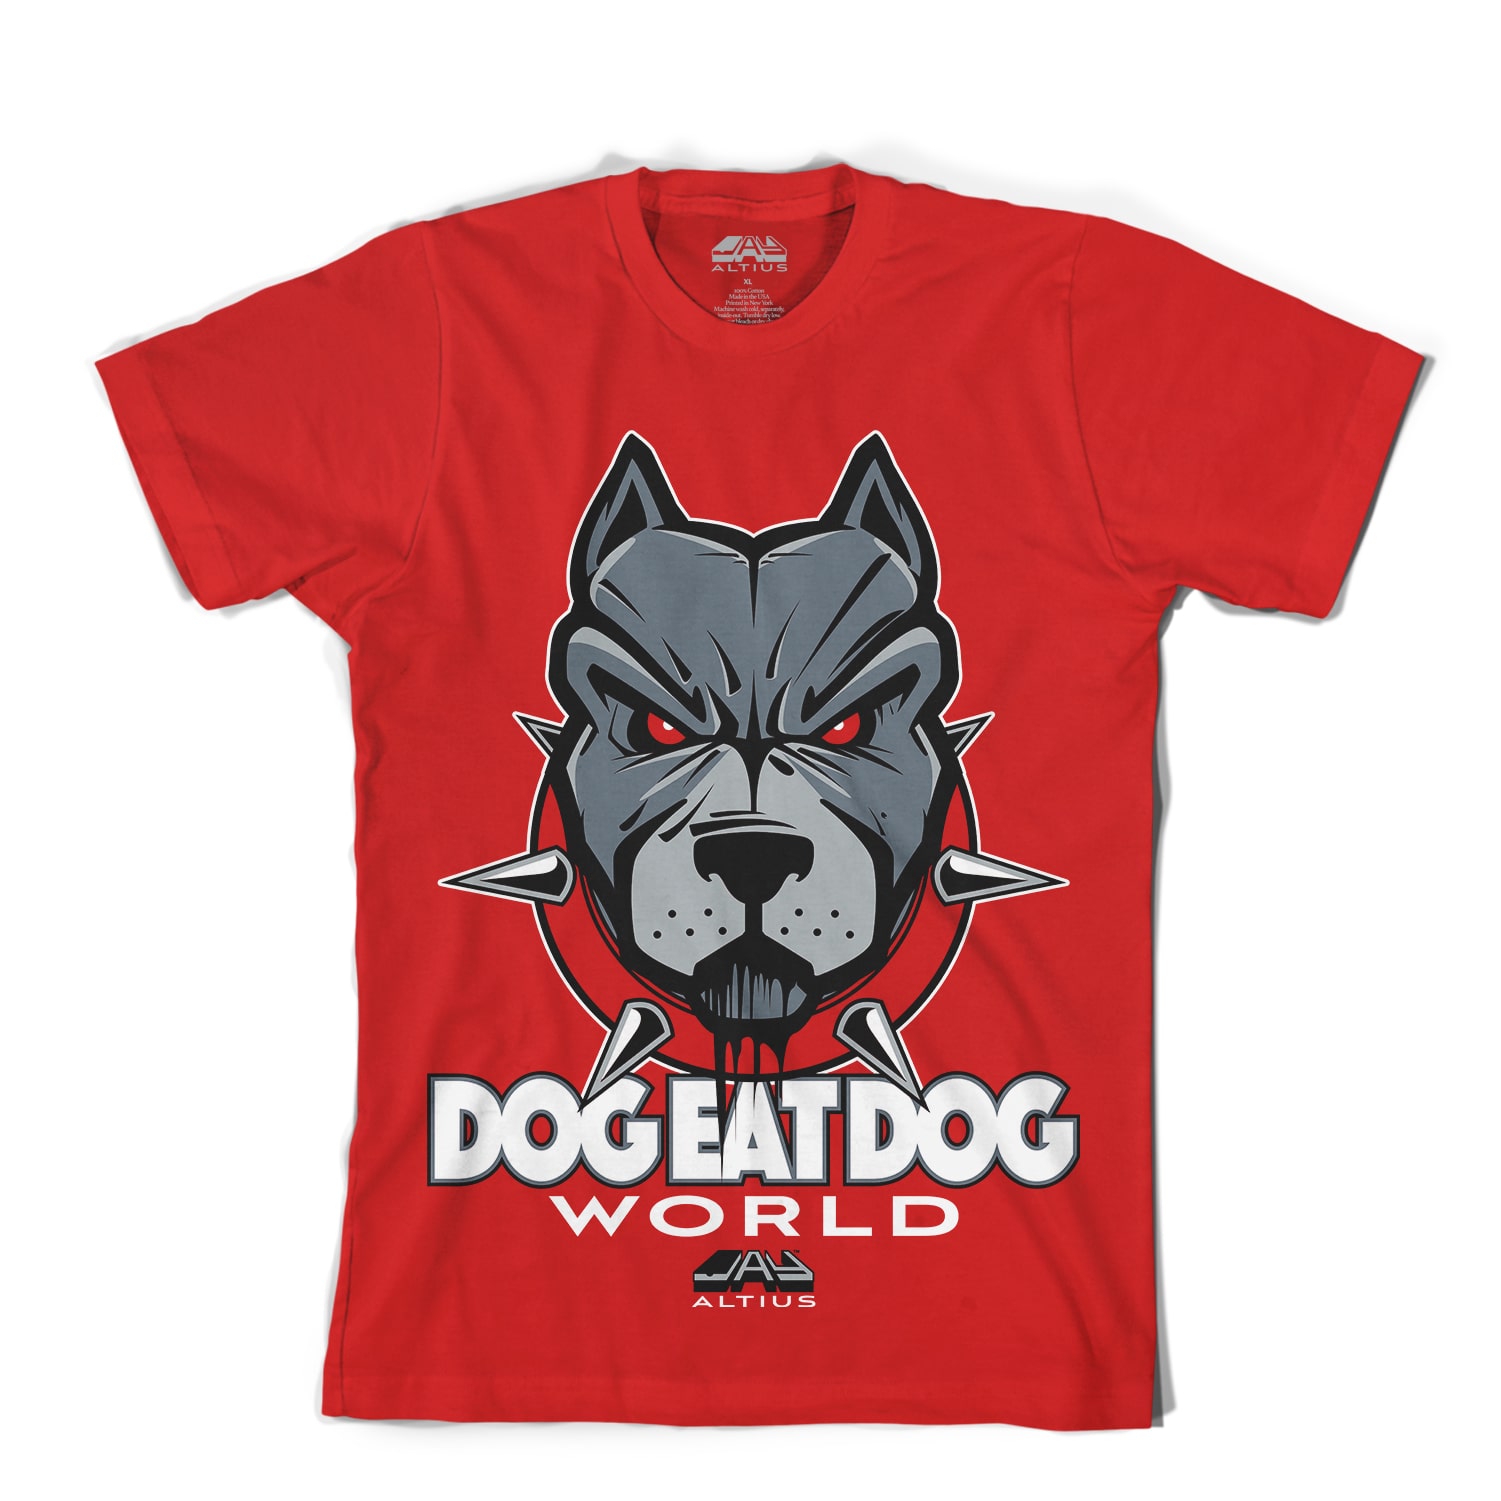 Dog Eat Dog Fire Red T Shirt by Jay Altius